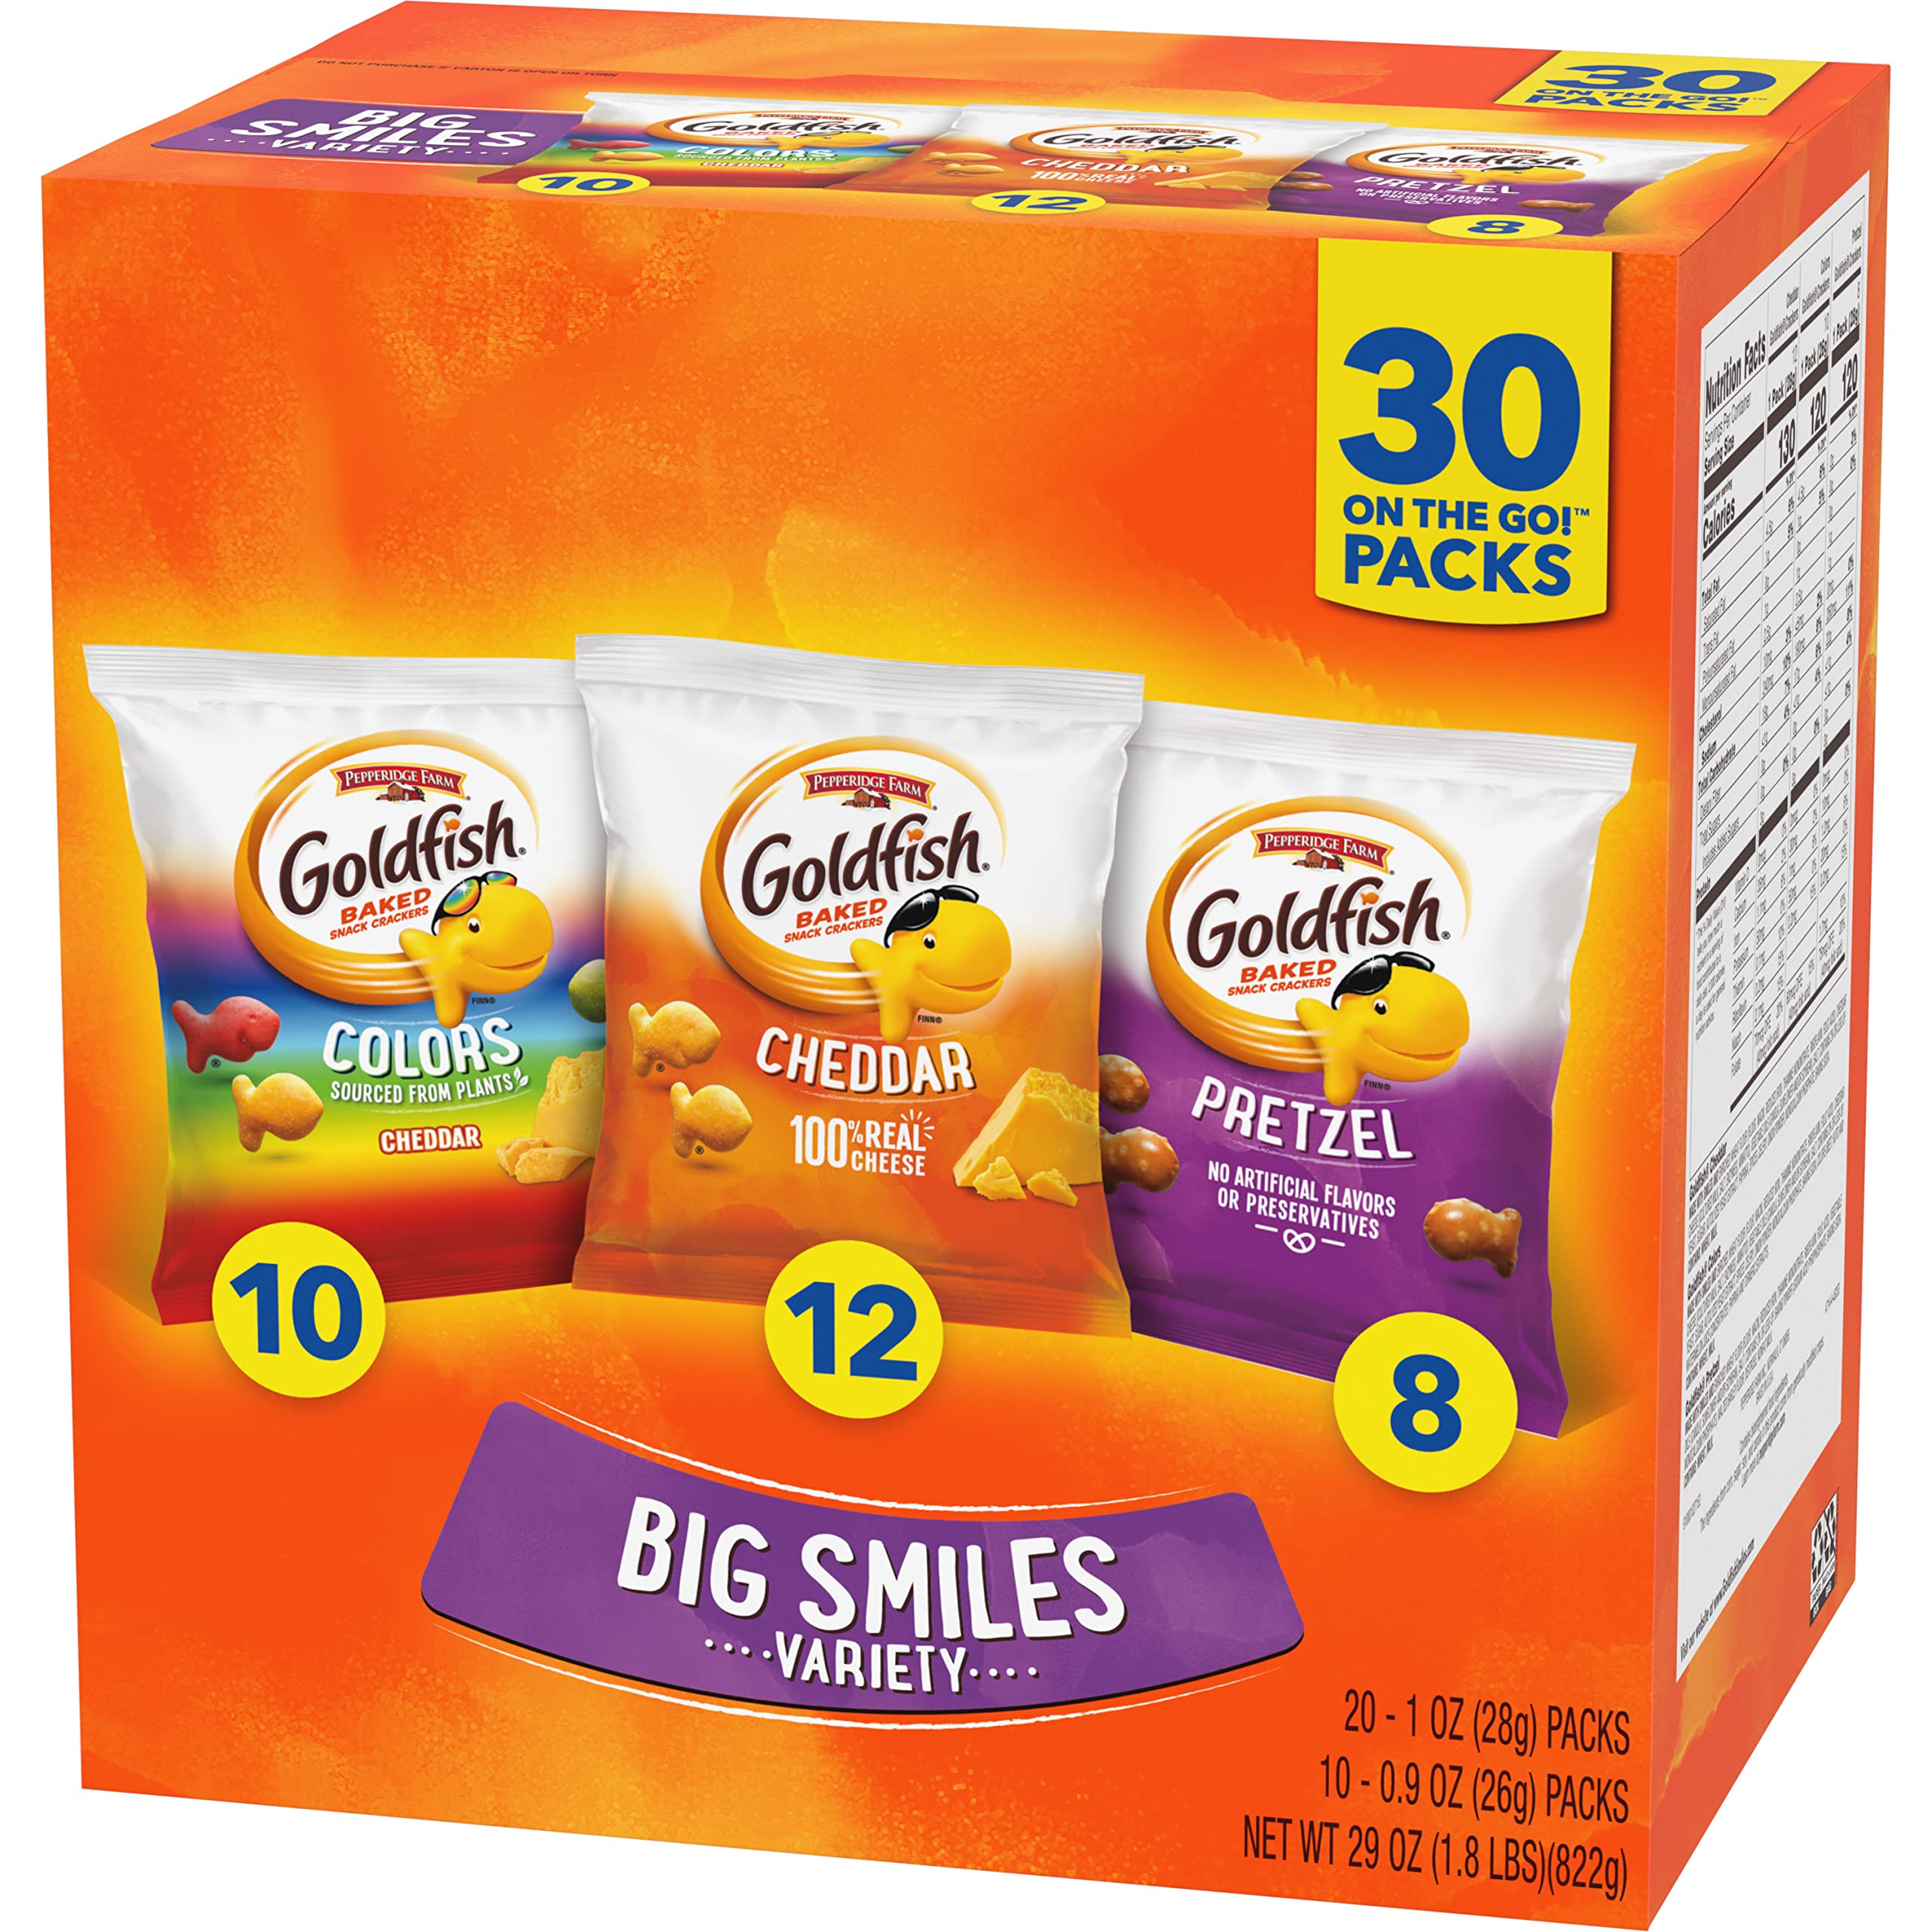 30-Count Goldfish Crackers Snack Pack Variety Pack (Cheddar, Colors, & Pretzels) $10.74 w/ S&S + Free Shipping w/ Prime or on $25+